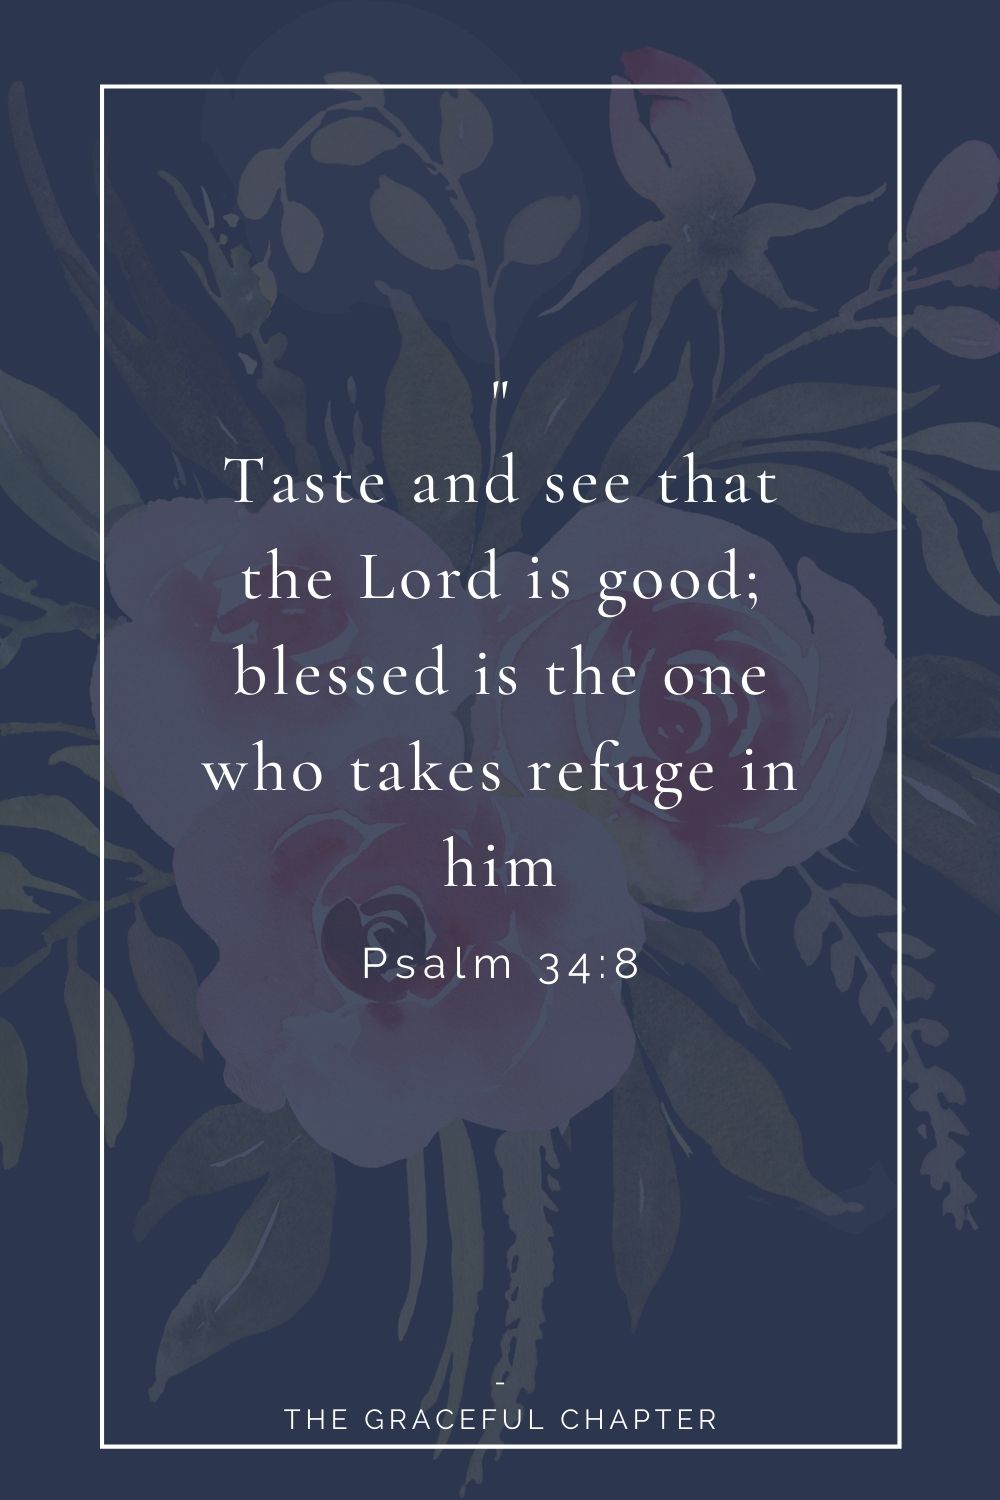 Taste and see that the Lord is good; blessed is the one who takes refuge in him. Psalm 34:8